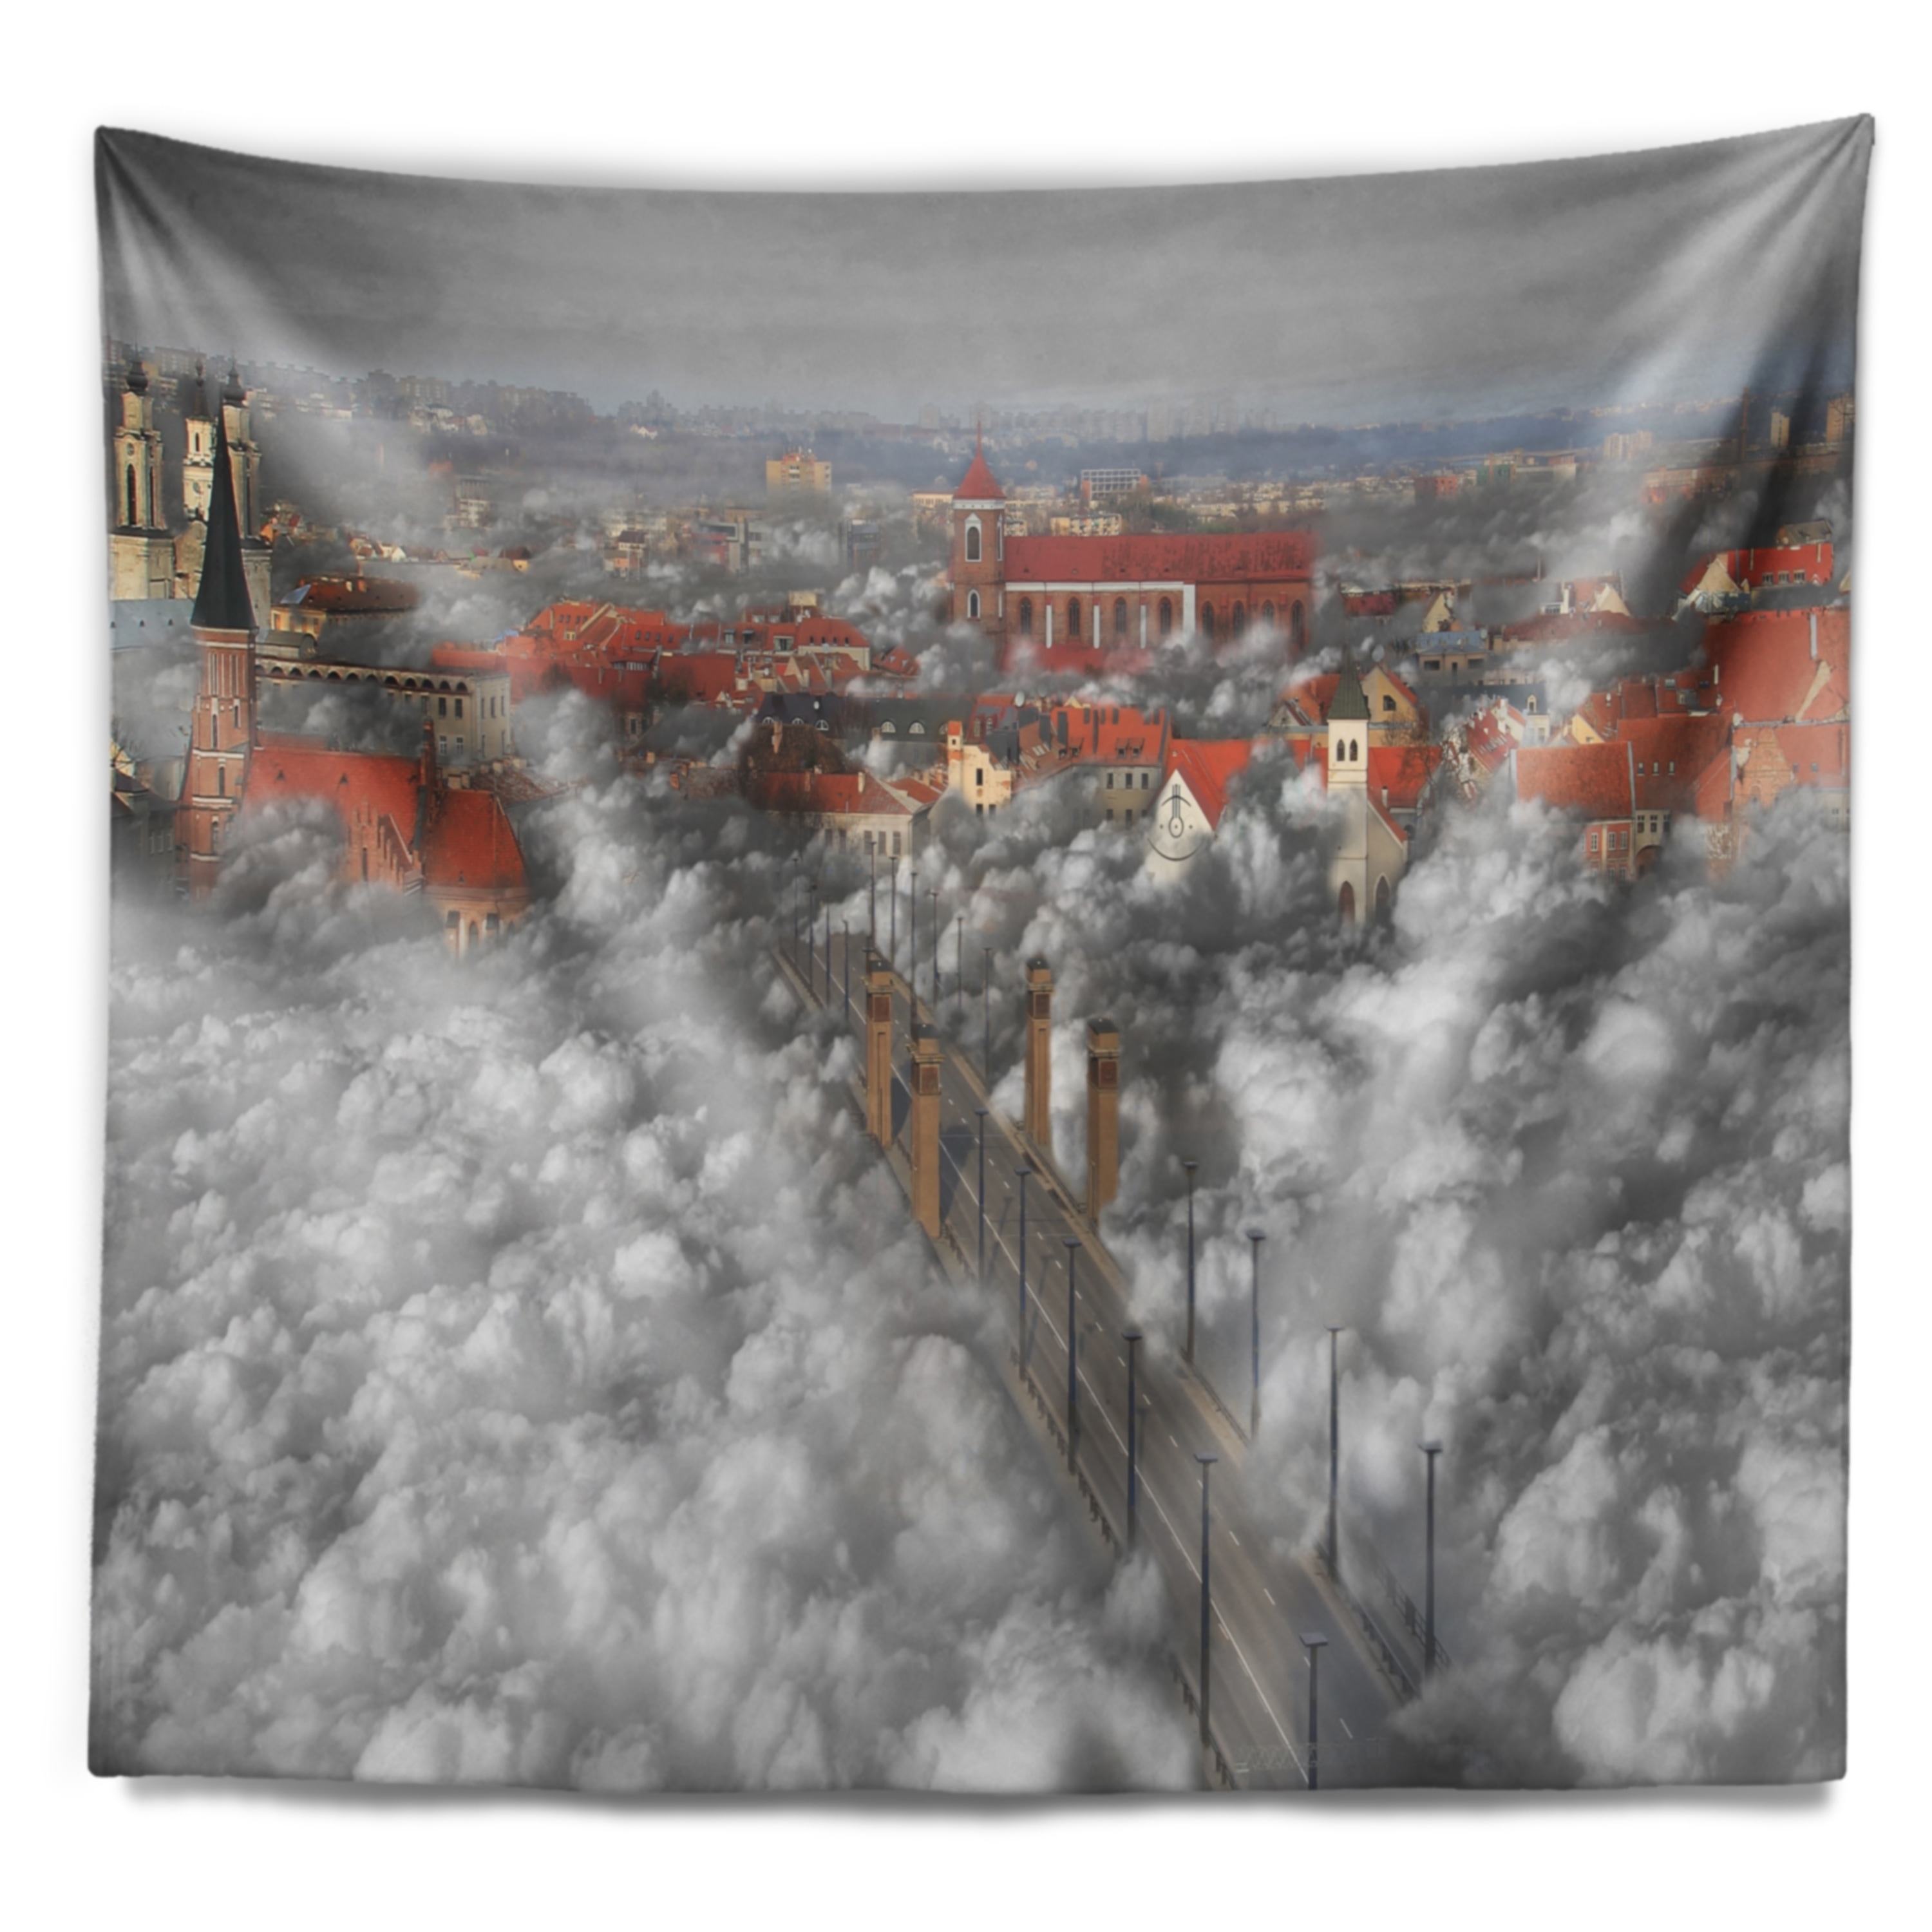 Designart 'When the Cloud Descends' Abstract Wall Tapestry - Bed